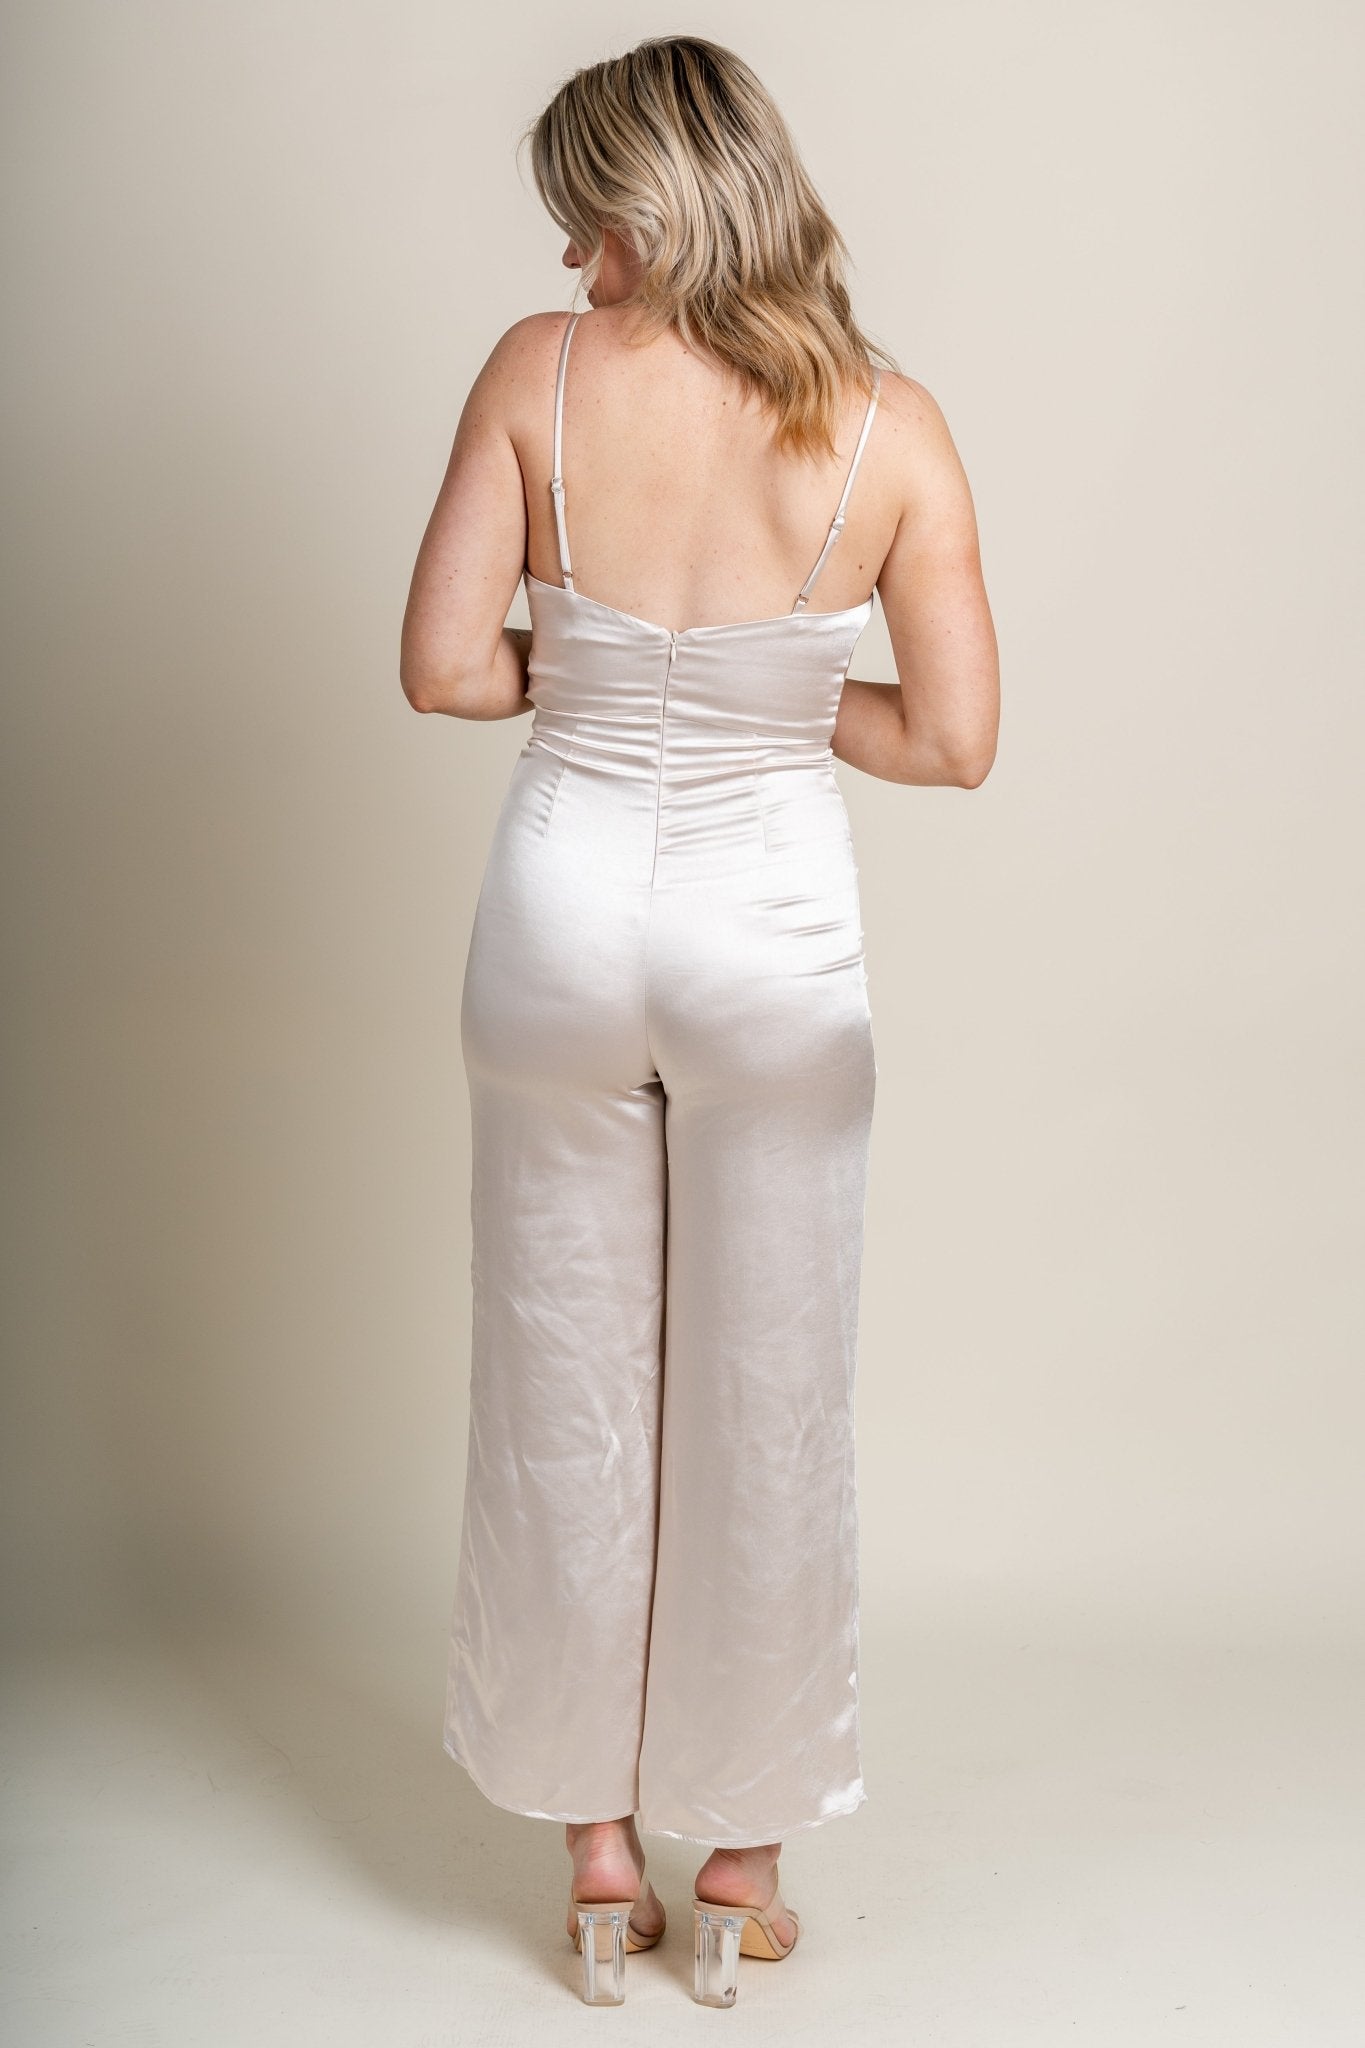 Cowl neck satin jumpsuit champagne Stylish Jumpsuit - Womens Fashion Rompers & Pantsuits at Lush Fashion Lounge Boutique in Oklahoma City